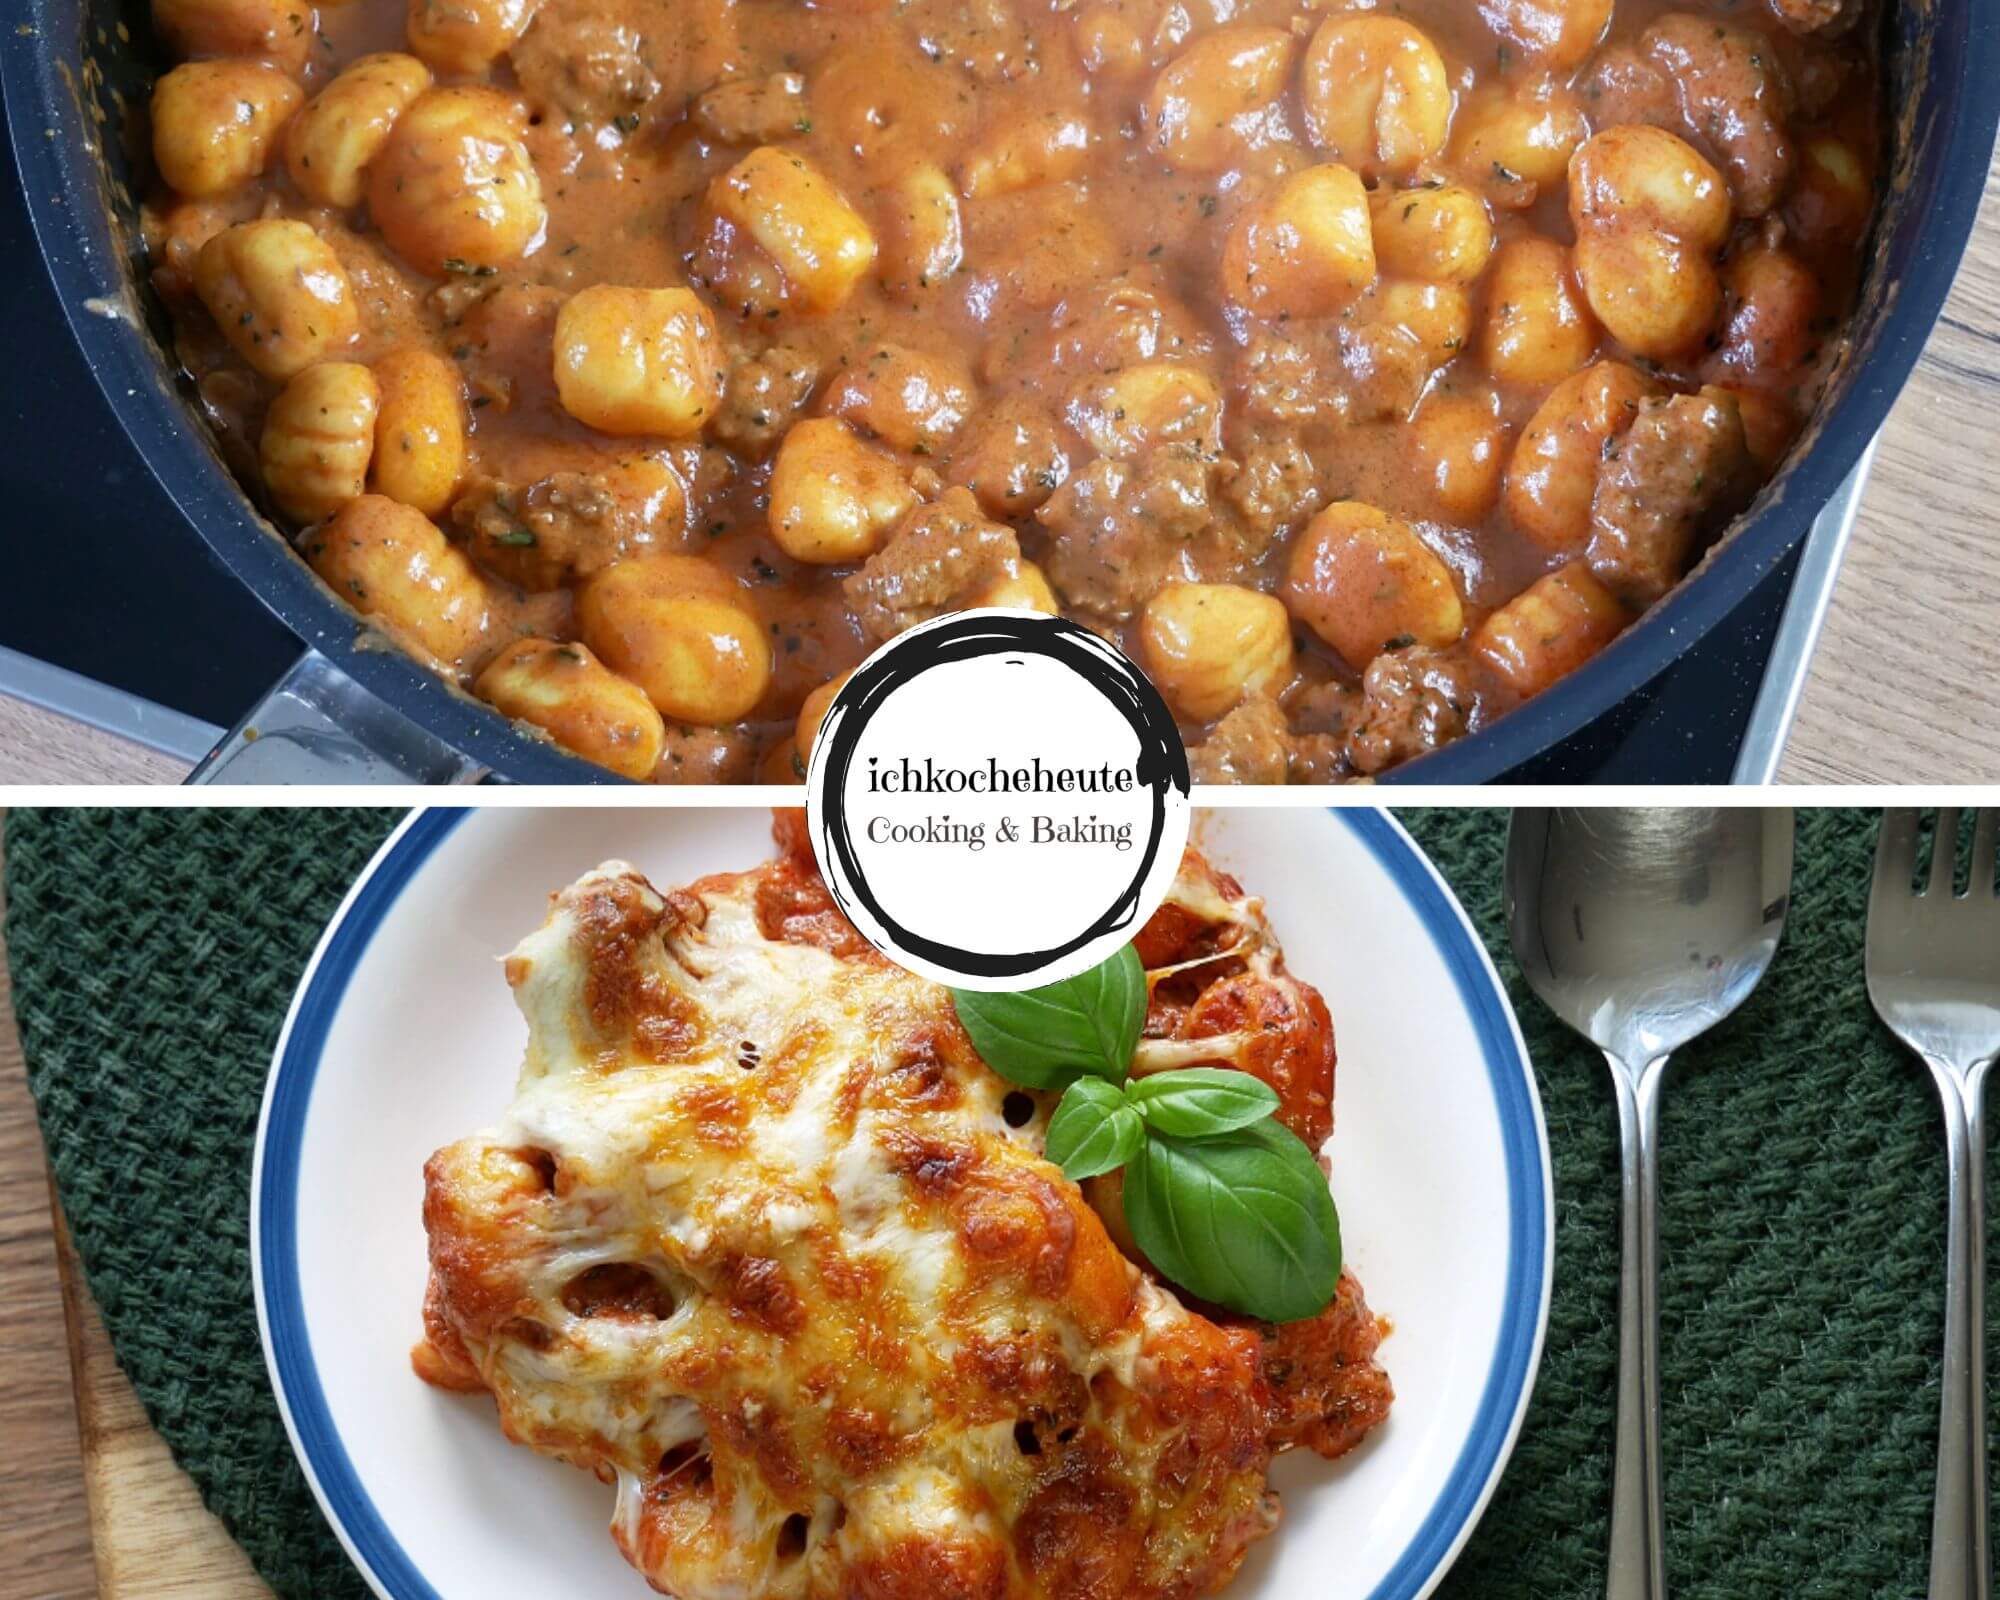 Serving Oven Baked Gnocchi with Meat Sauce